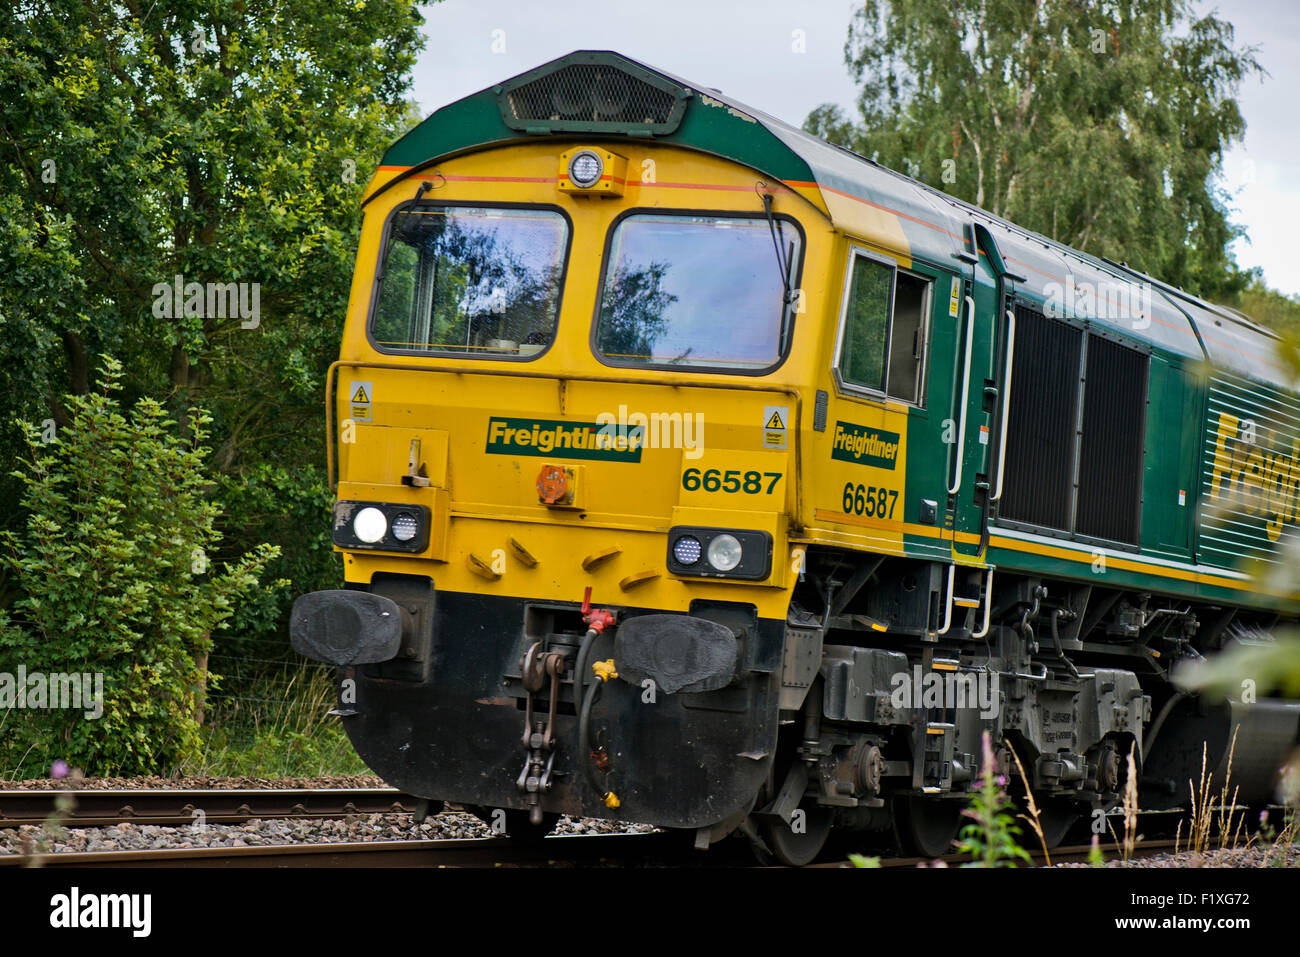 Freightliner train (66587) on railway line next to the Whisby Nature Park, Near Lincoln, Lincolnshire, UK Stock Photo